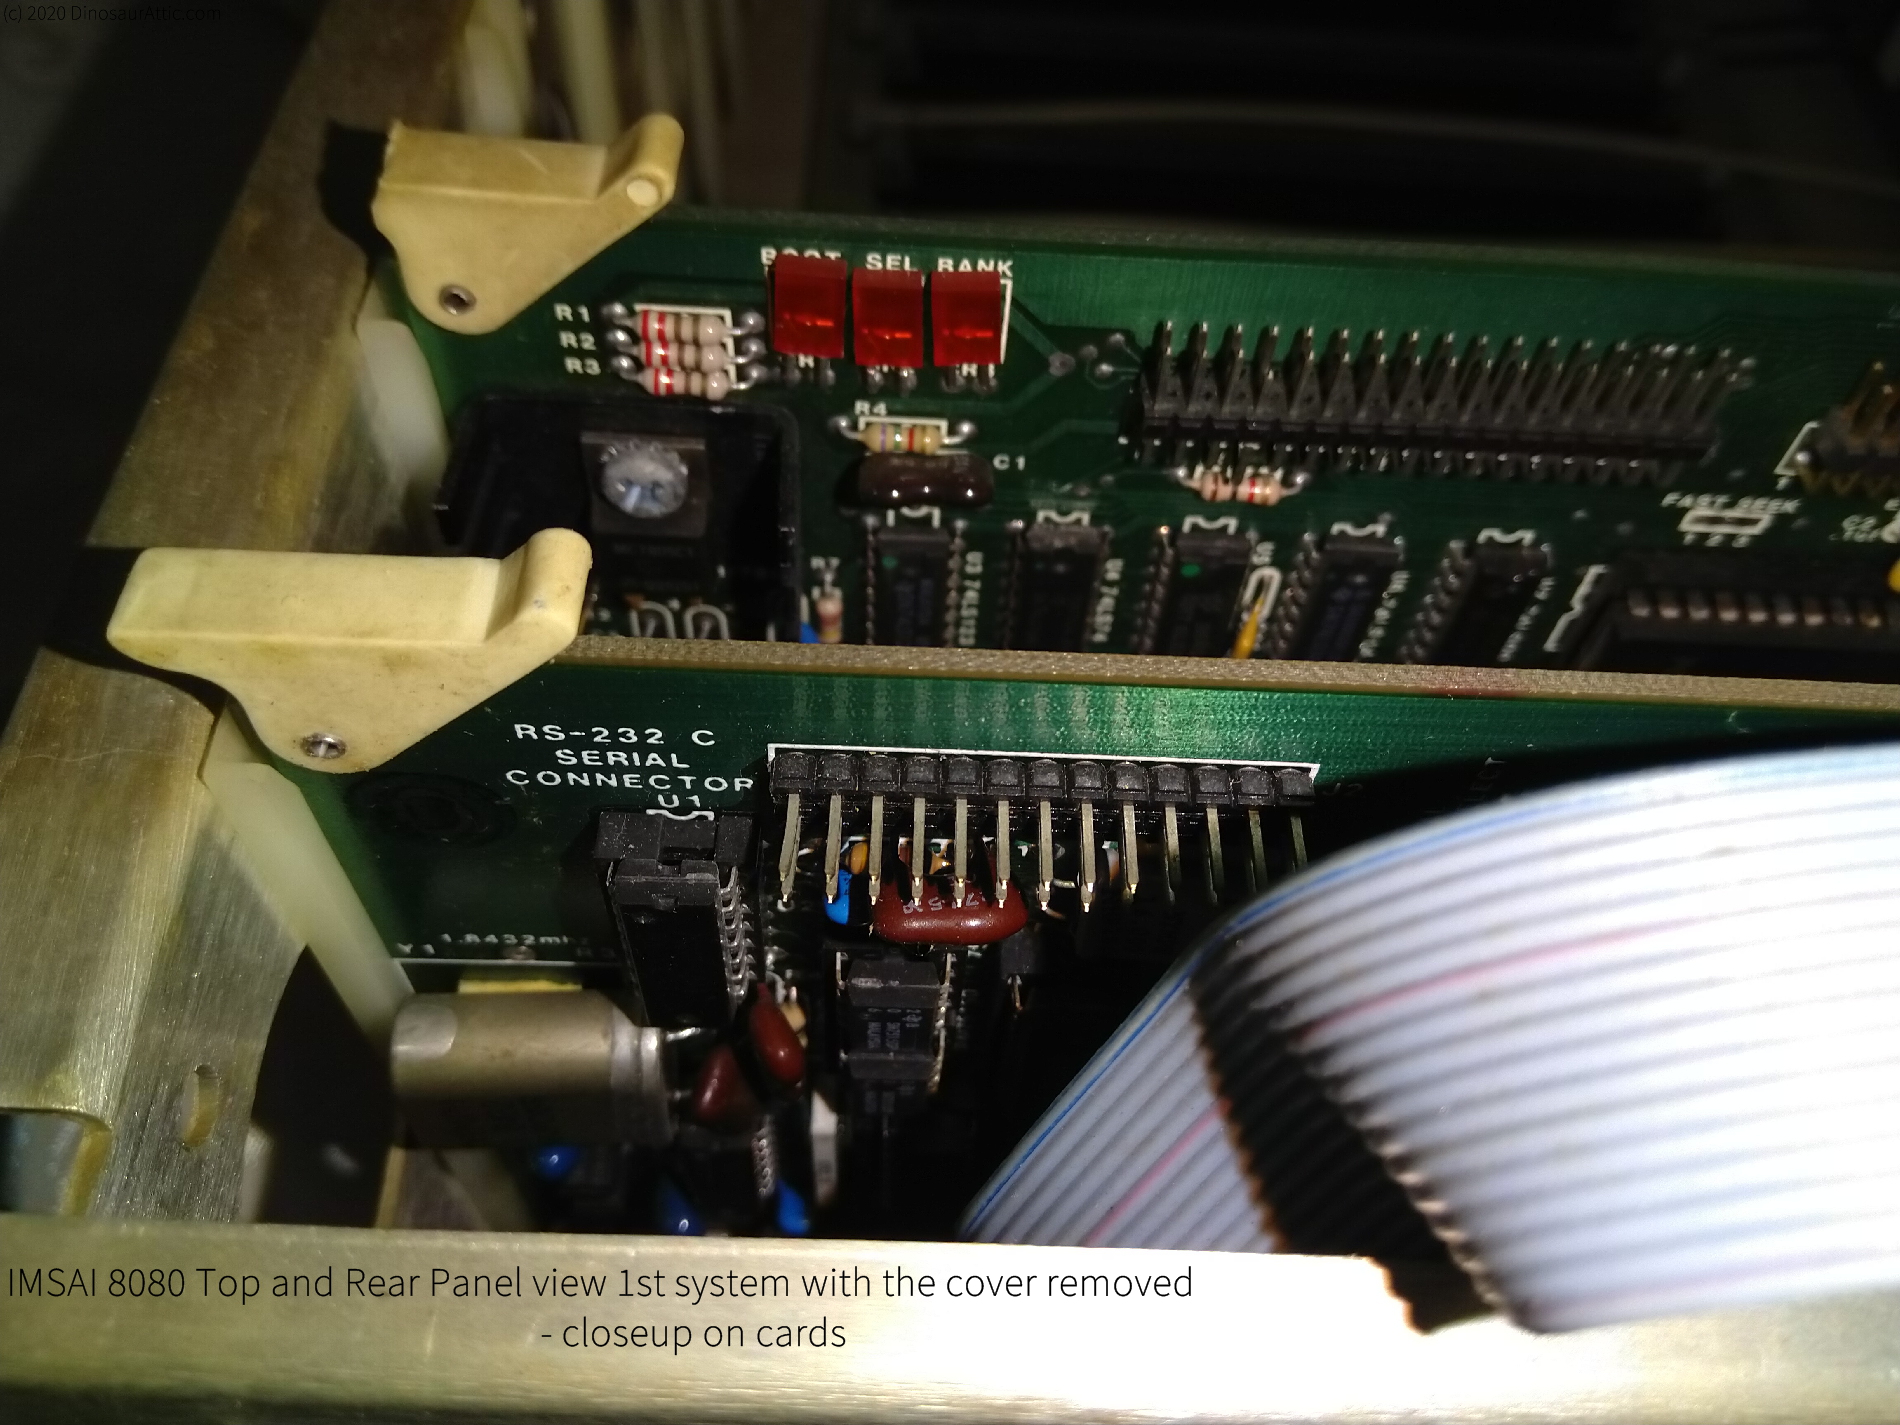 <b>IMSAI 8080 Top and Rear Panel view 1st system with the cover removed - closeup - cards</b>